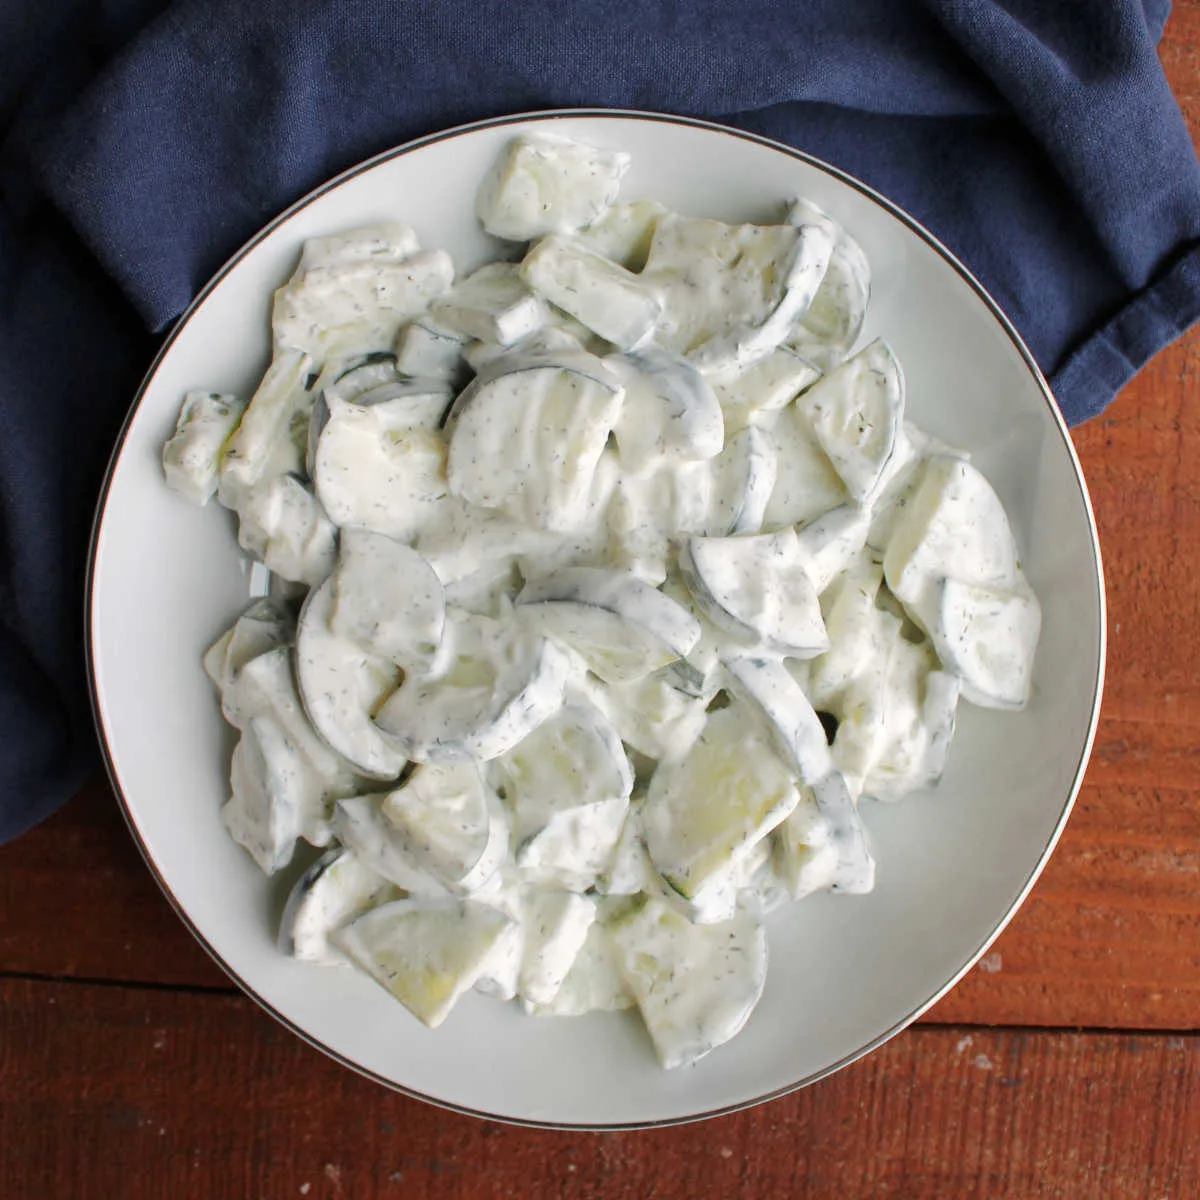 Serving bowl filled with creamy cucumber salad with a sour cream and dill dressing.